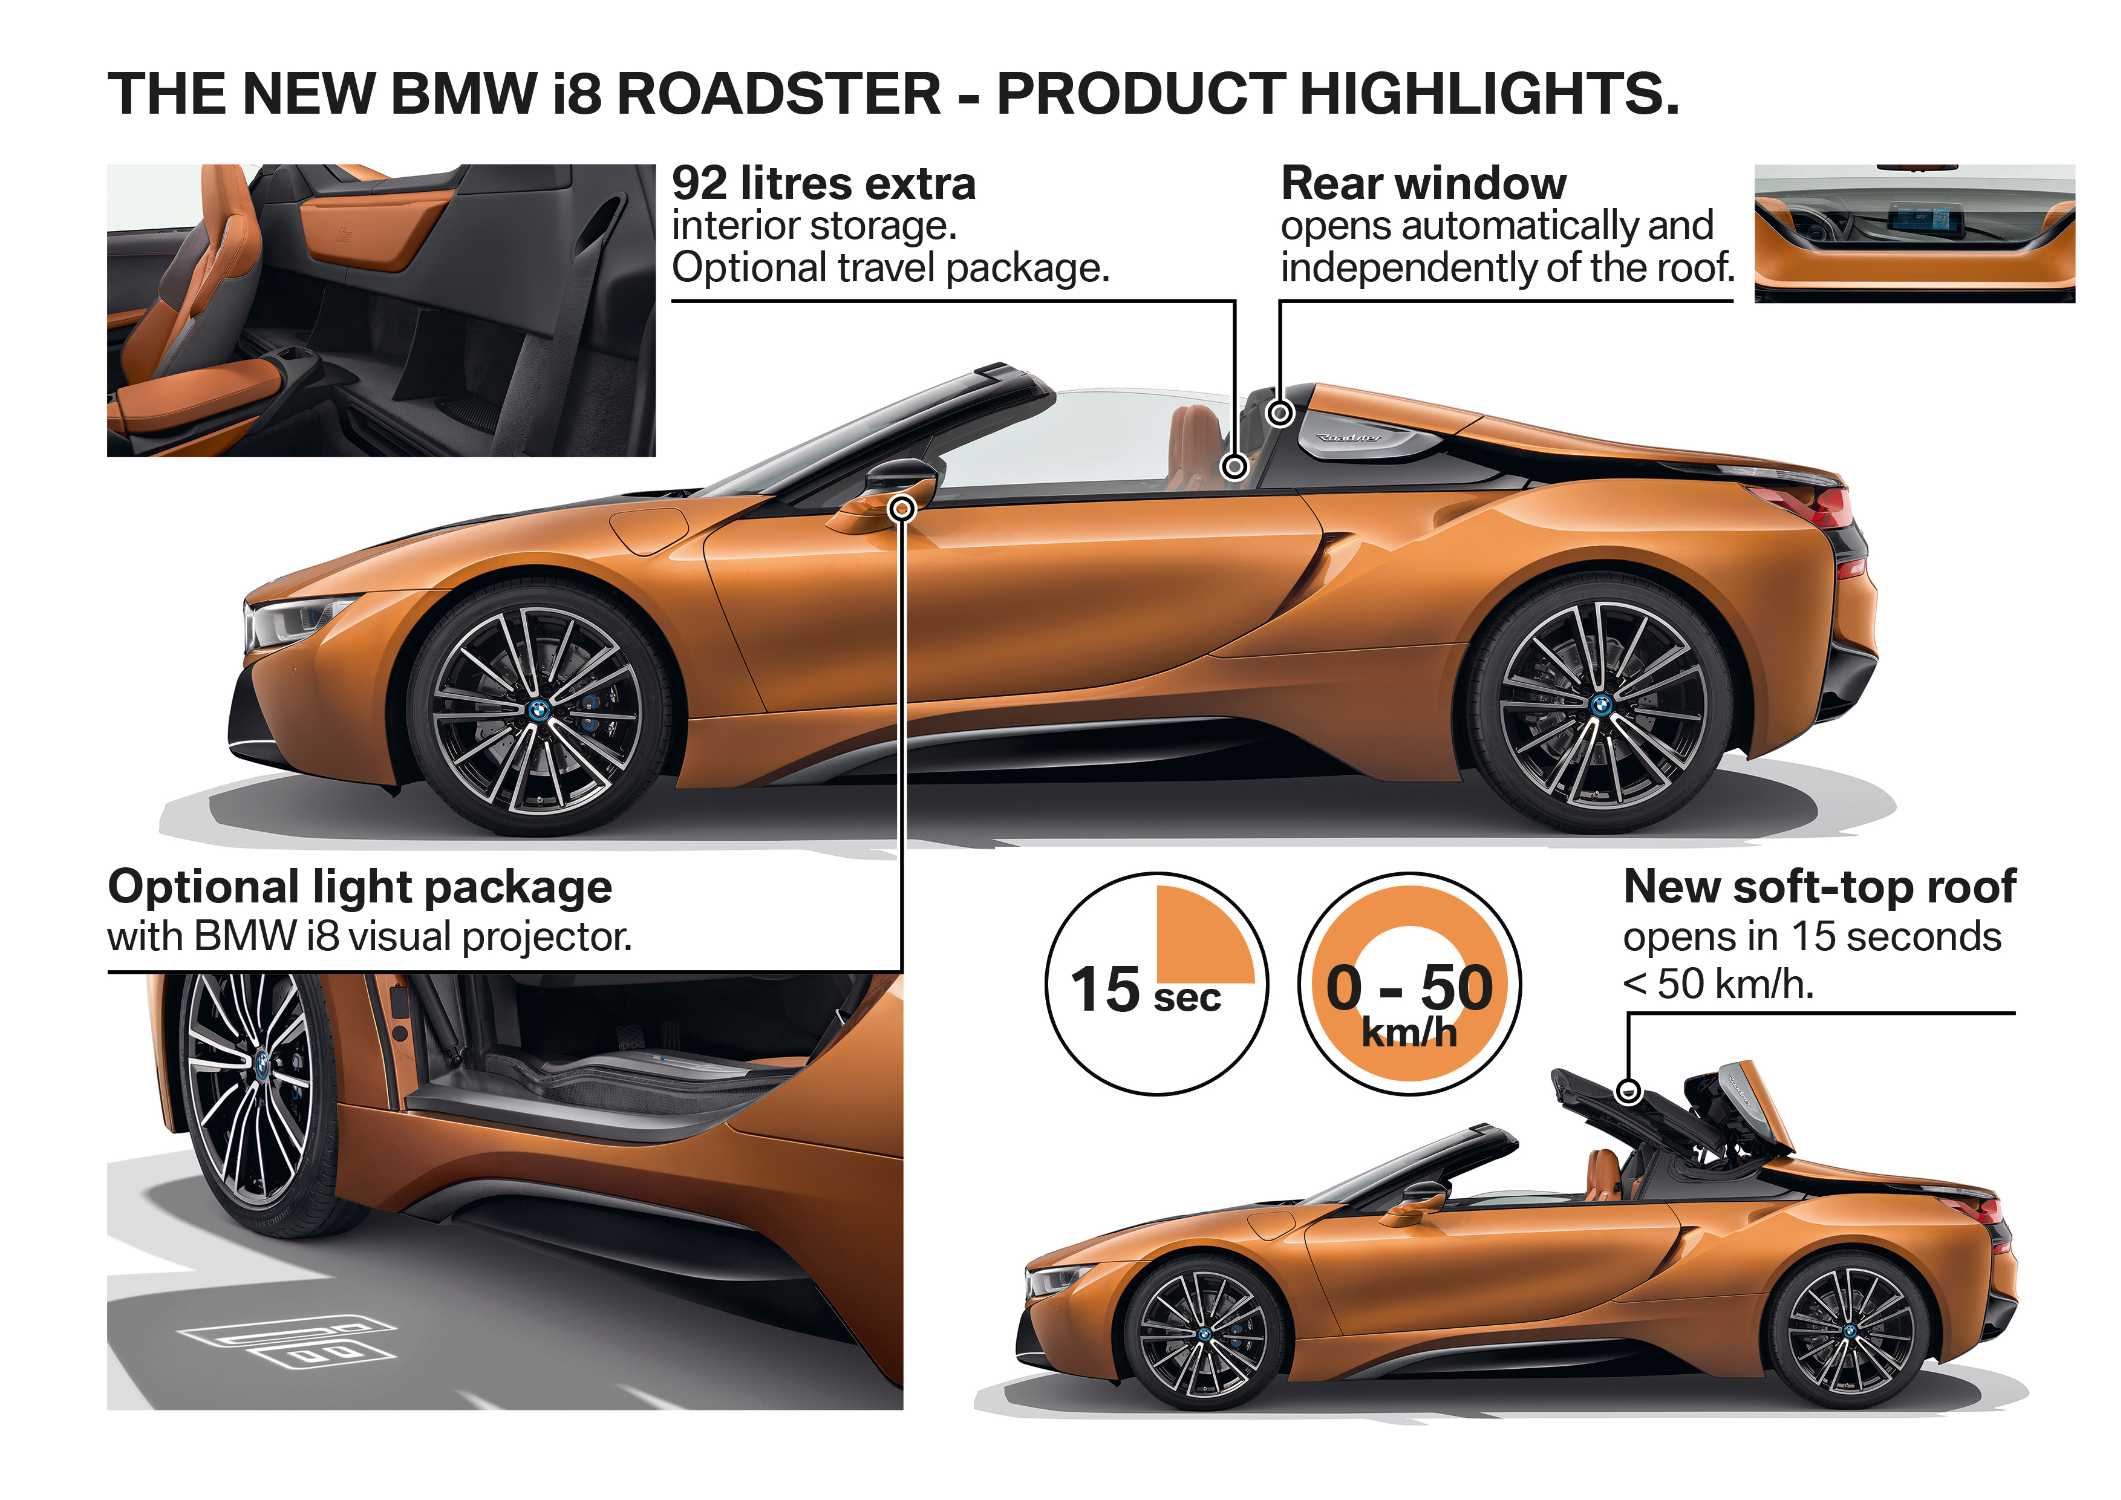 The new BMW i8 Roadster - Product Highlights. (11/2017)